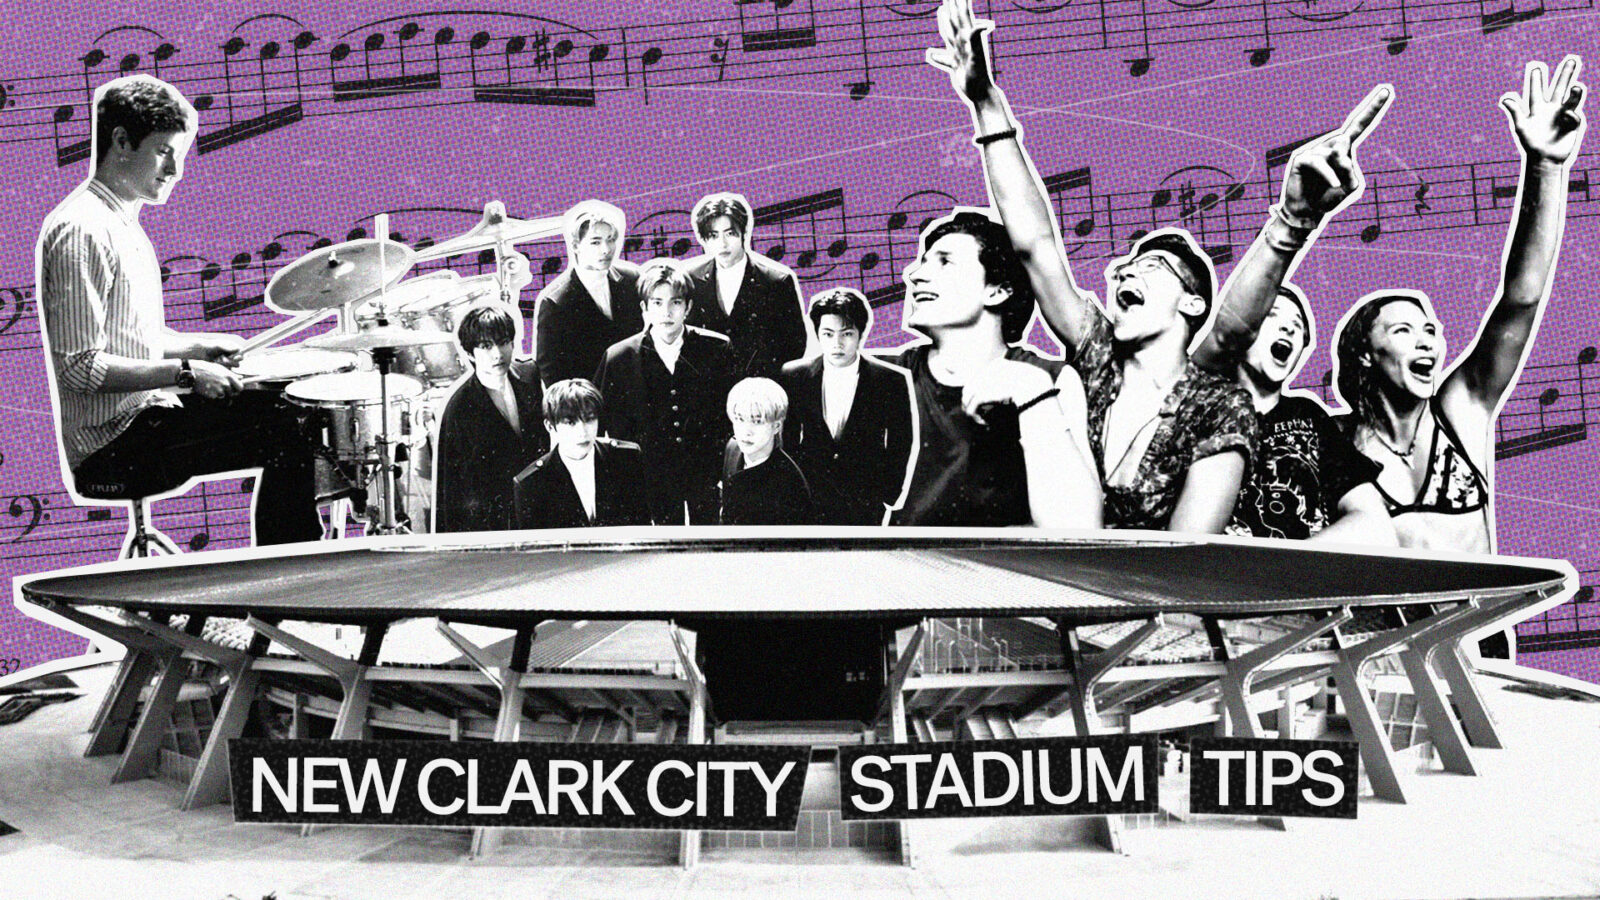 Everything You Need To Be Prepared For A Concert At The New Clark City Stadium